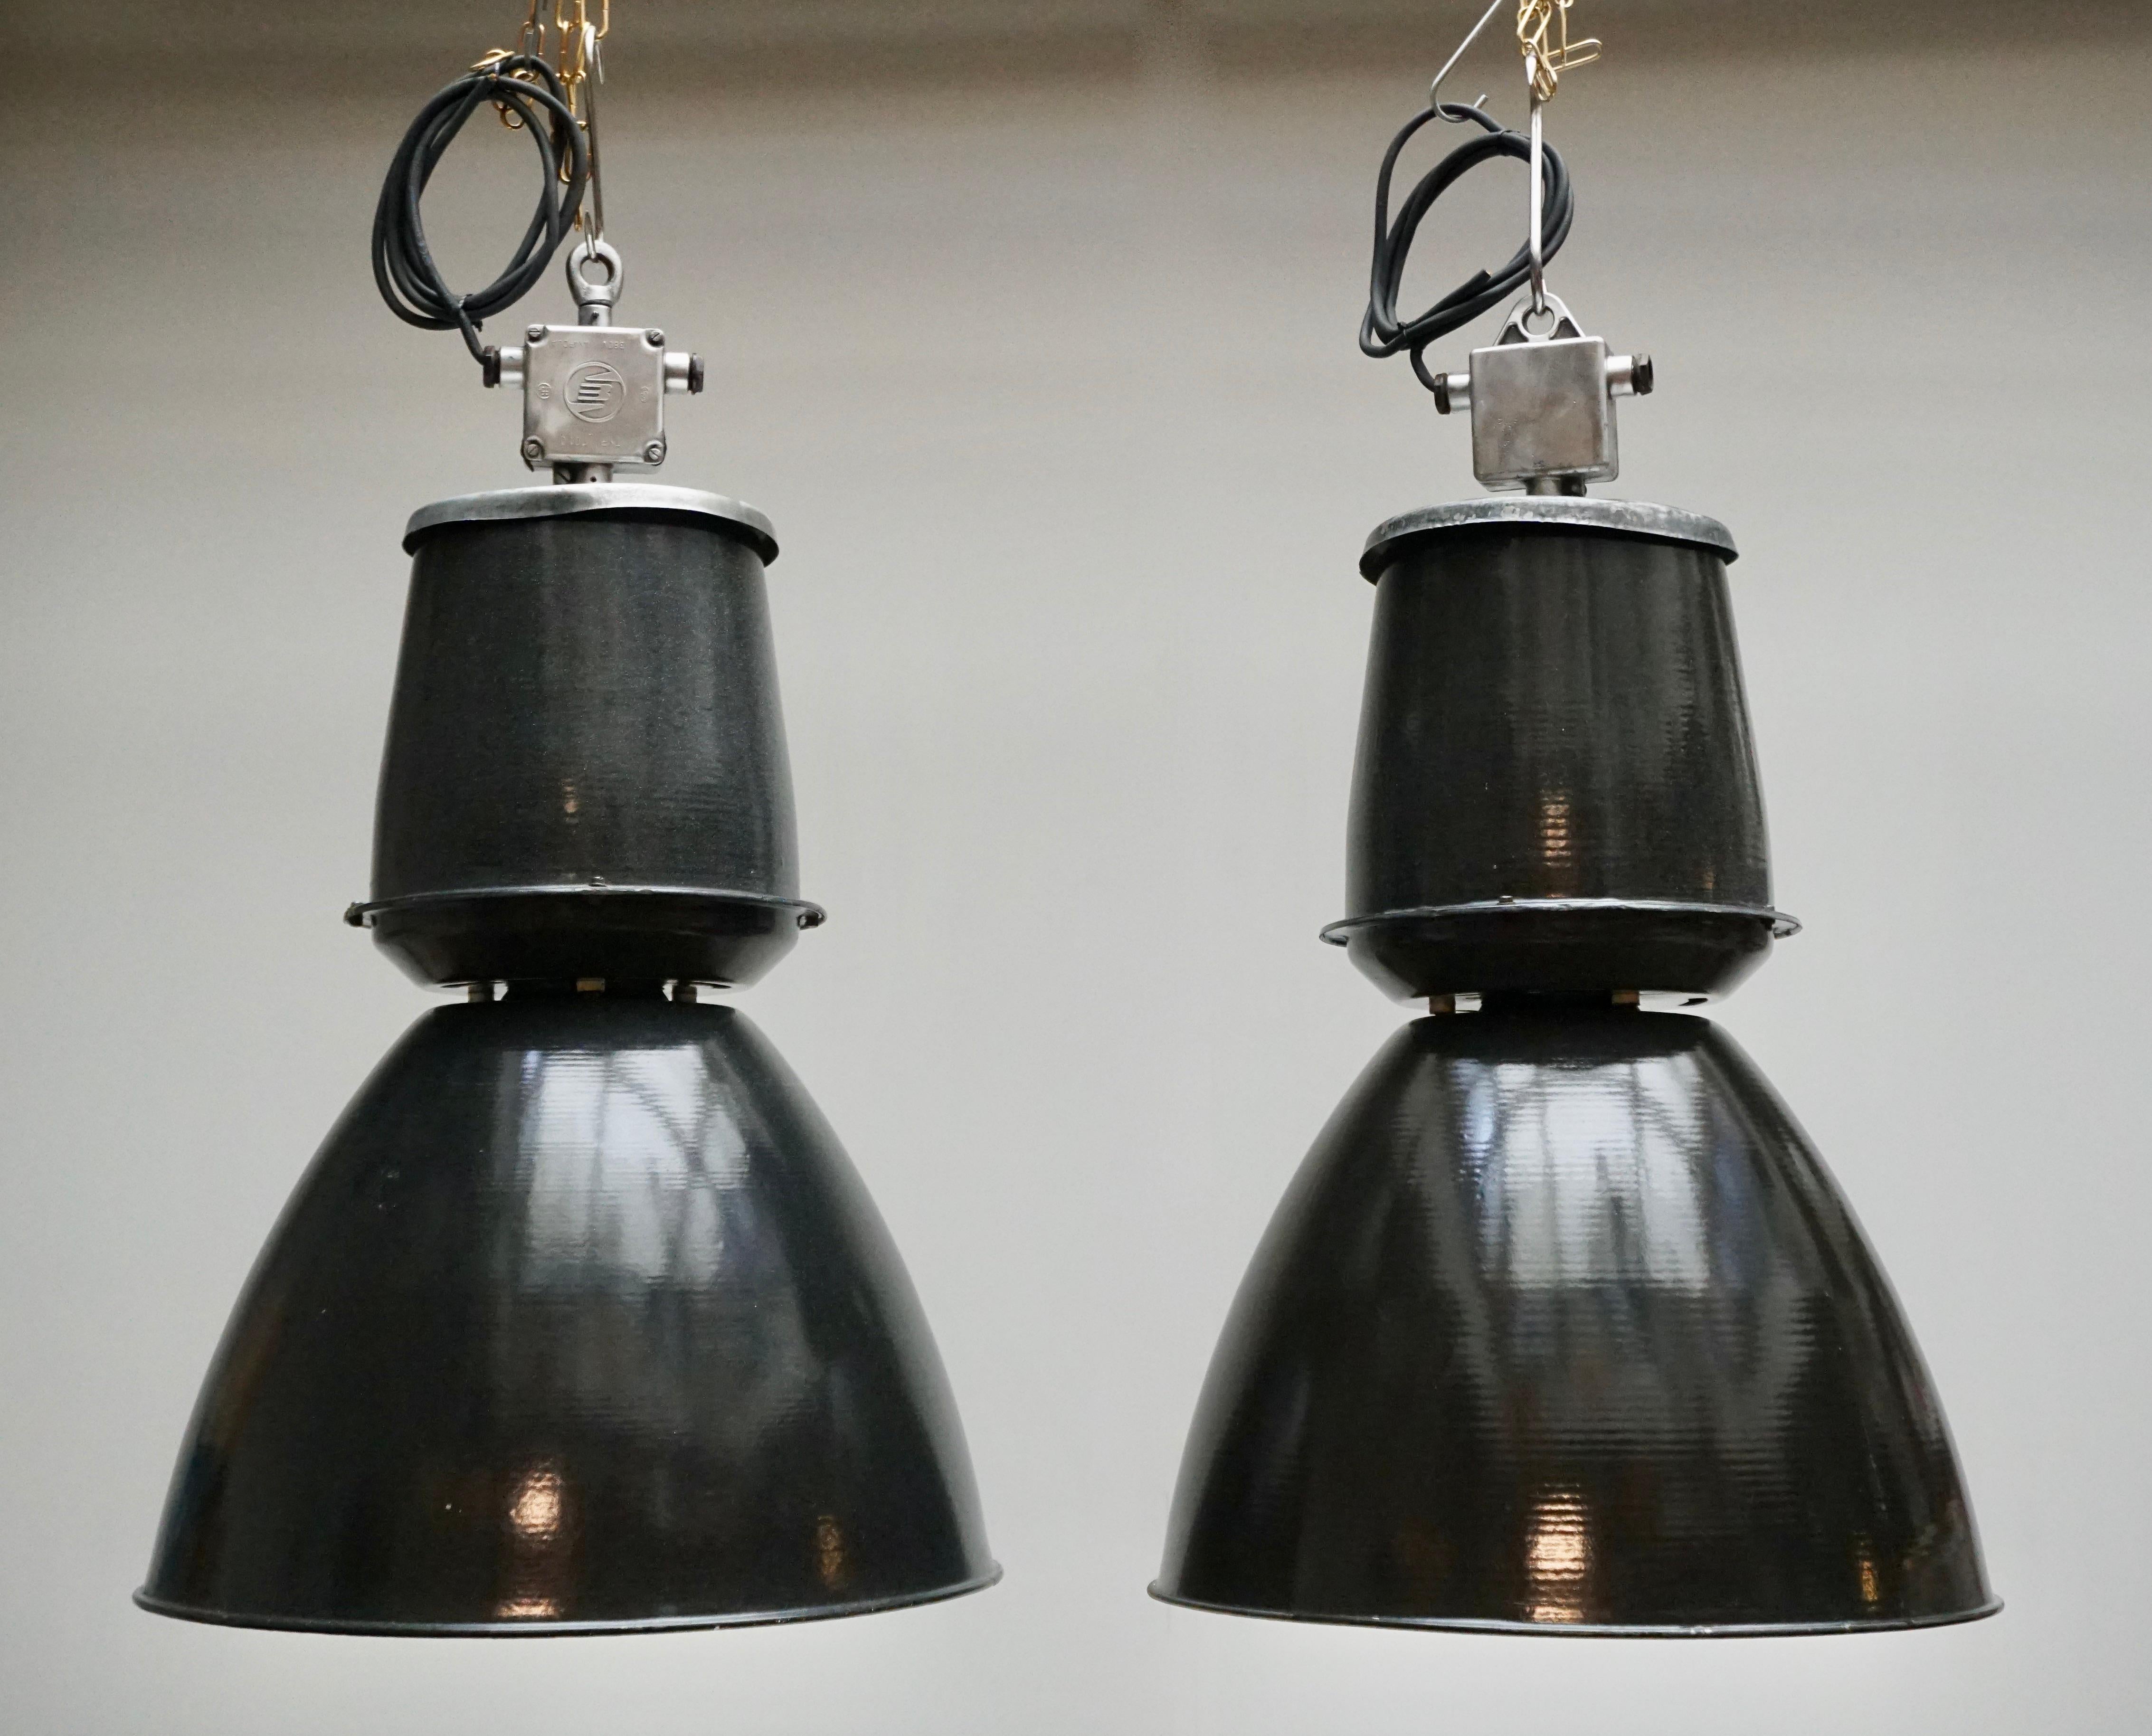 Eight Industrial down-lighters from the 1940s. Completely enameled inside and out. Greyish black on the outside, white on the inside. Great looking in a bar, a loft or over your kitchen table!
Diameter:53 cm.
Height:92 cm.